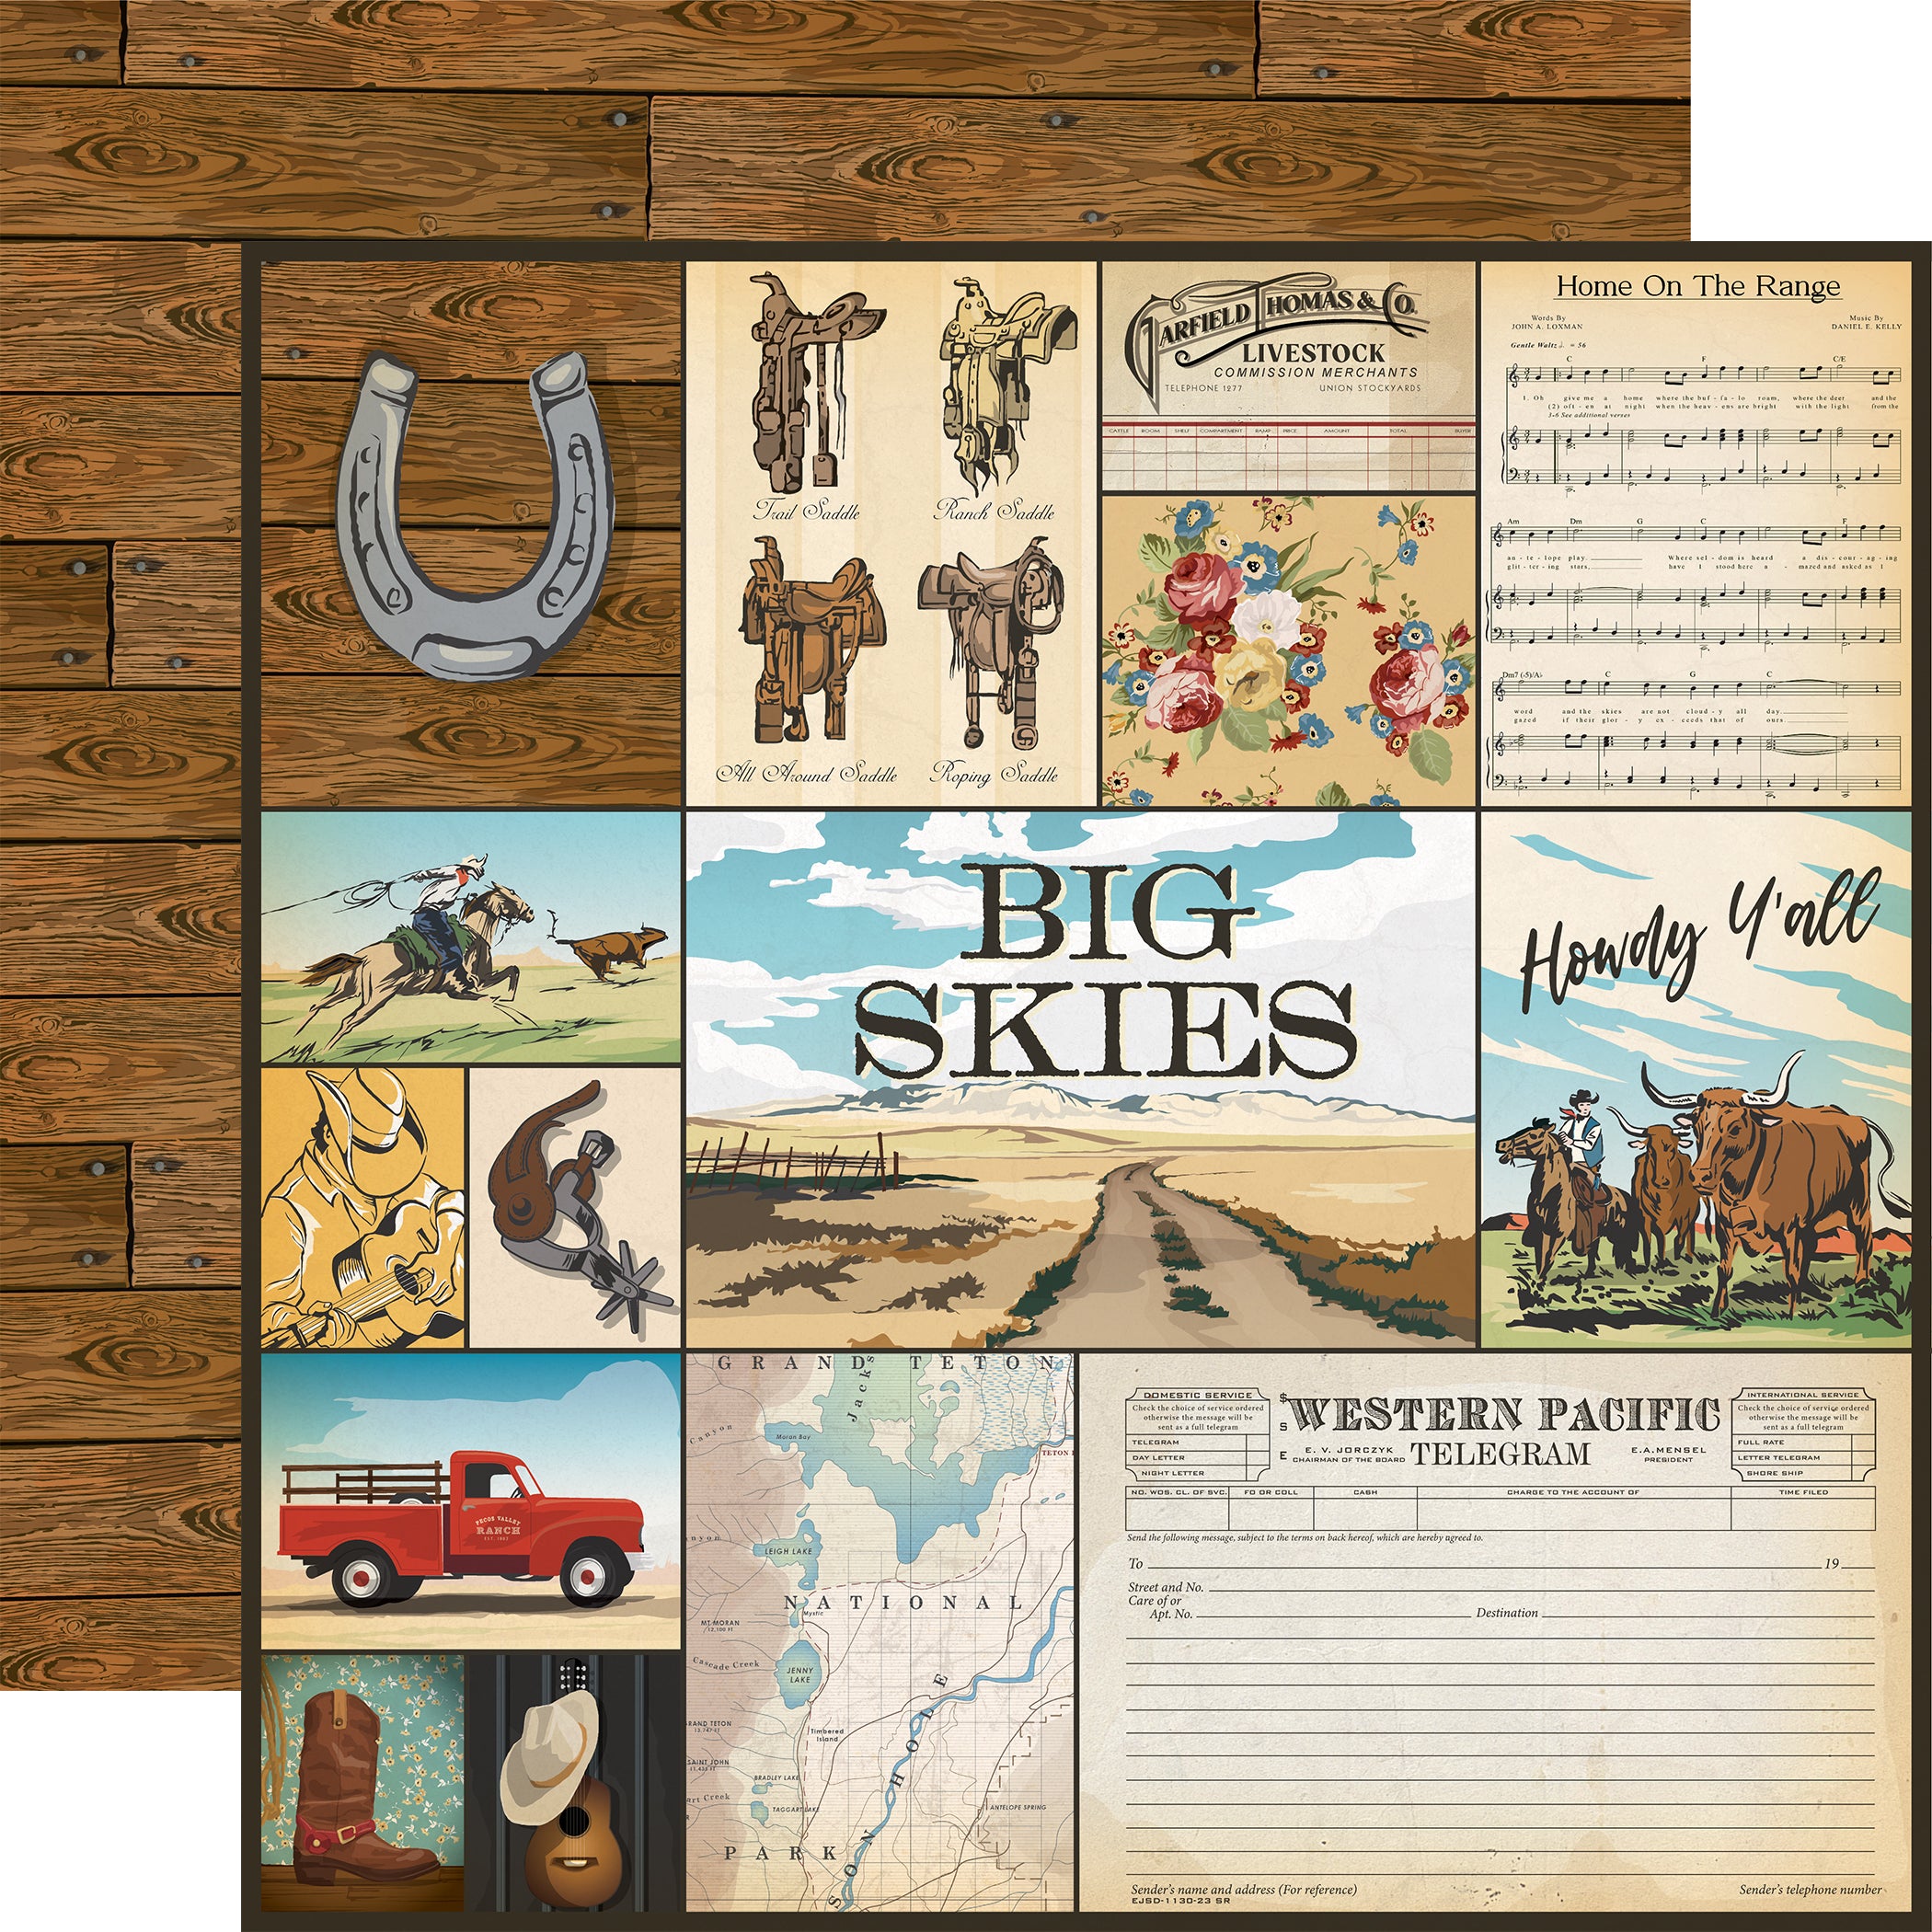 Cowboys Collection 12 x 12 Scrapbook Collection Kit by Echo Park Paper